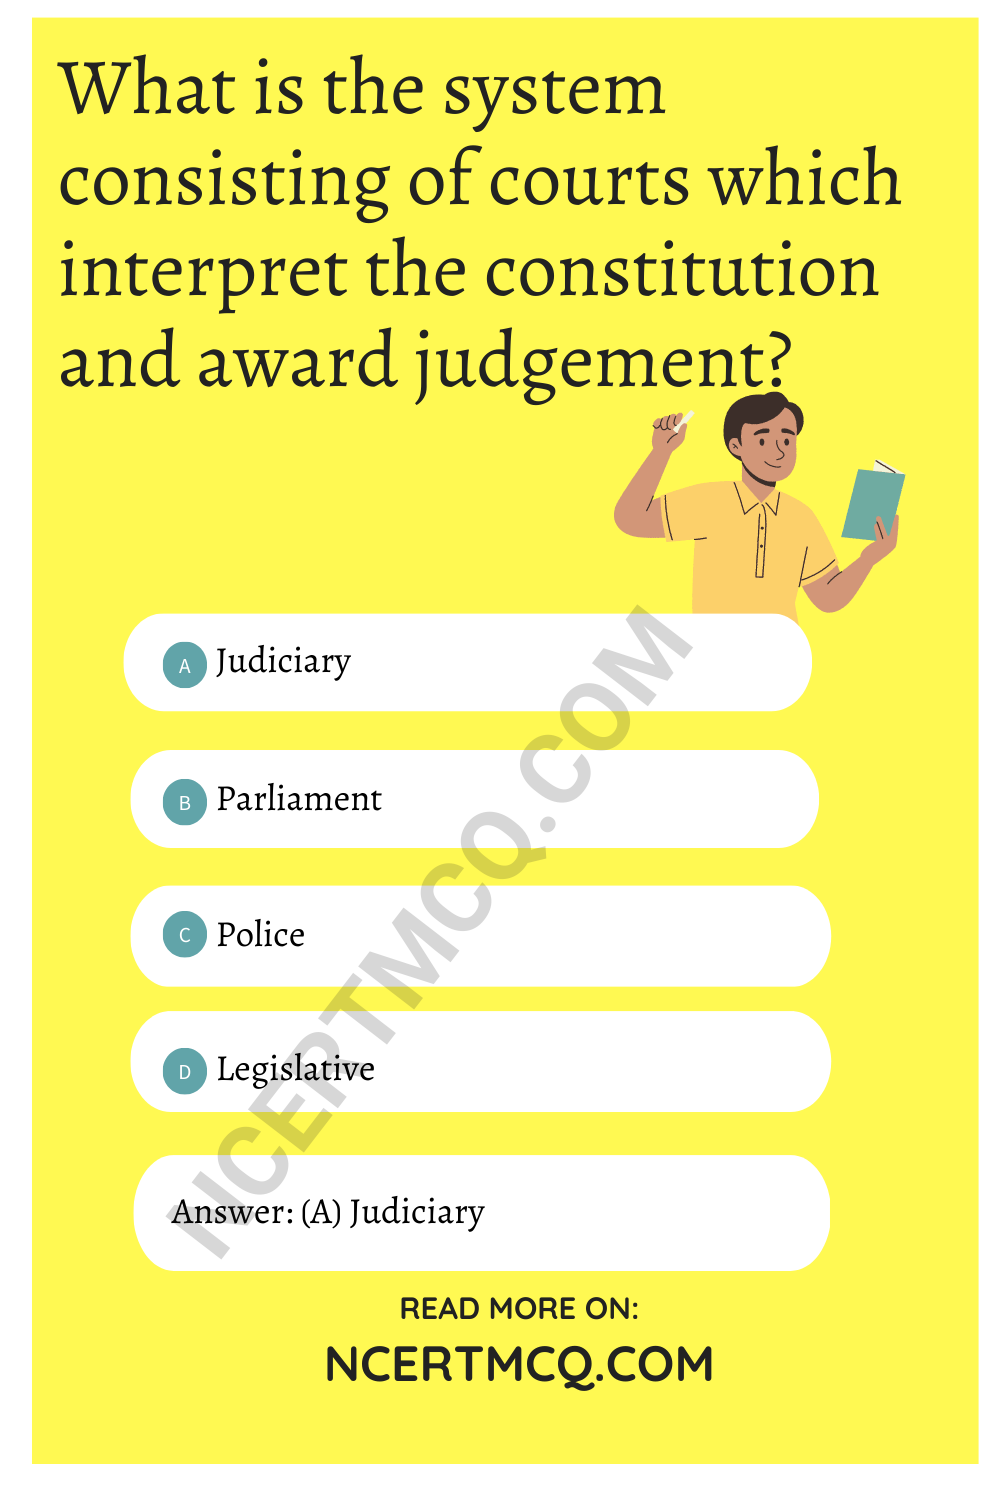 What is the system consisting of courts which interpret the constitution and award judgement?